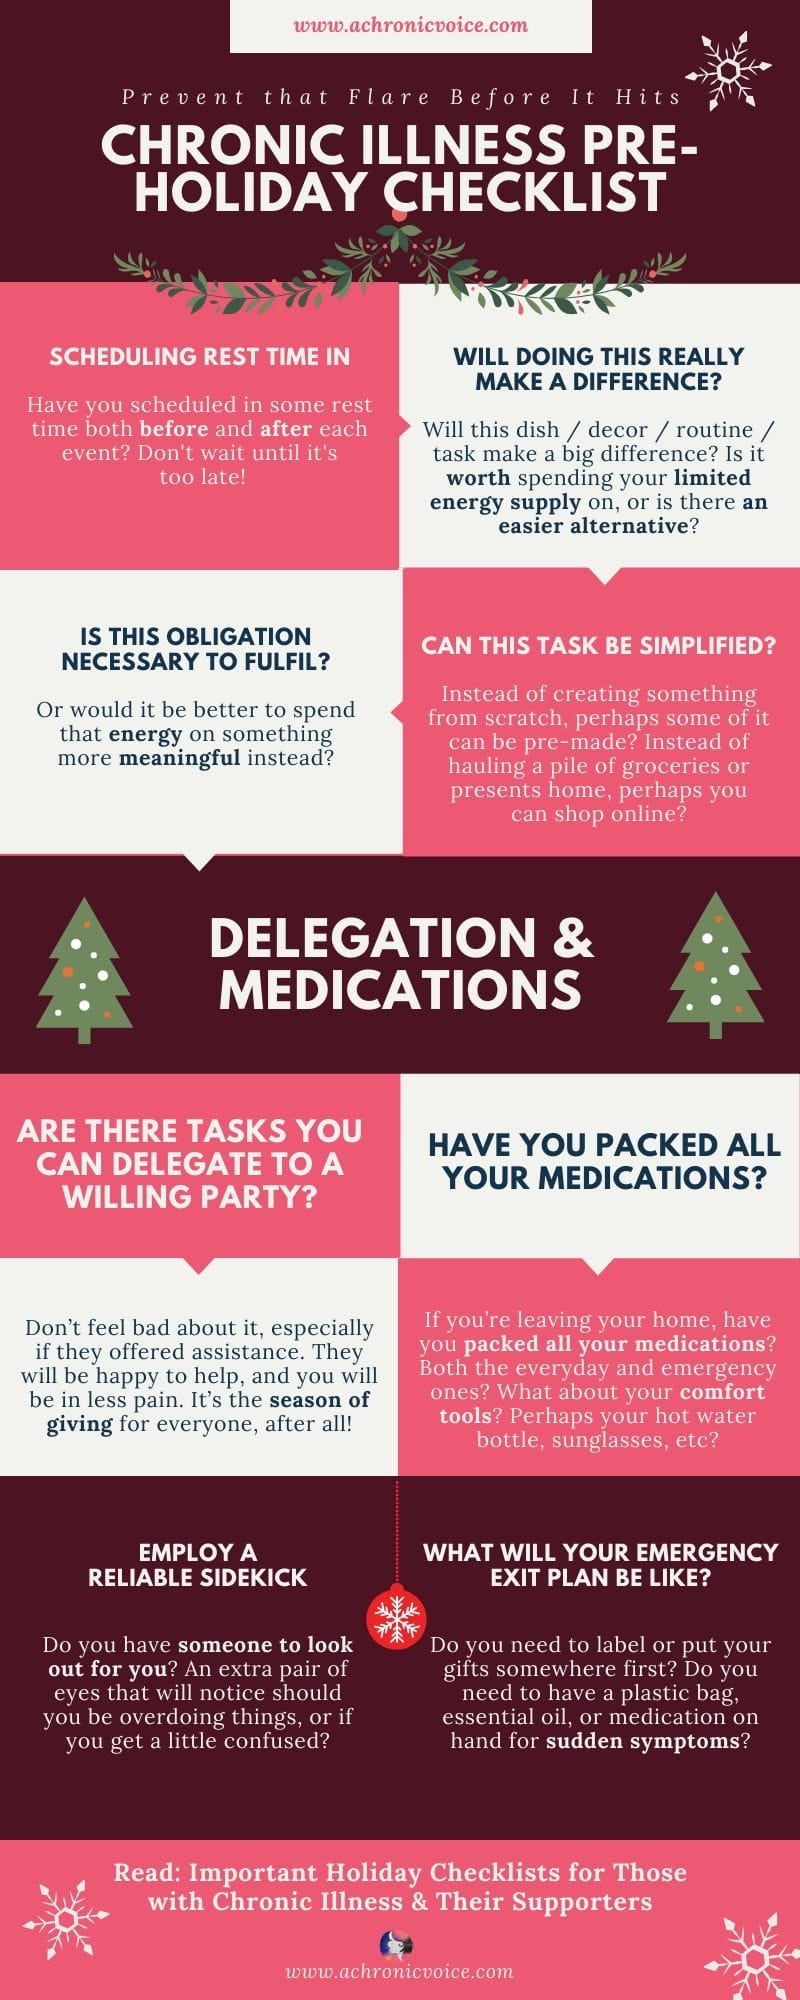 [Infographic] Your Self-Care Holiday Checklist with Chronic Illness